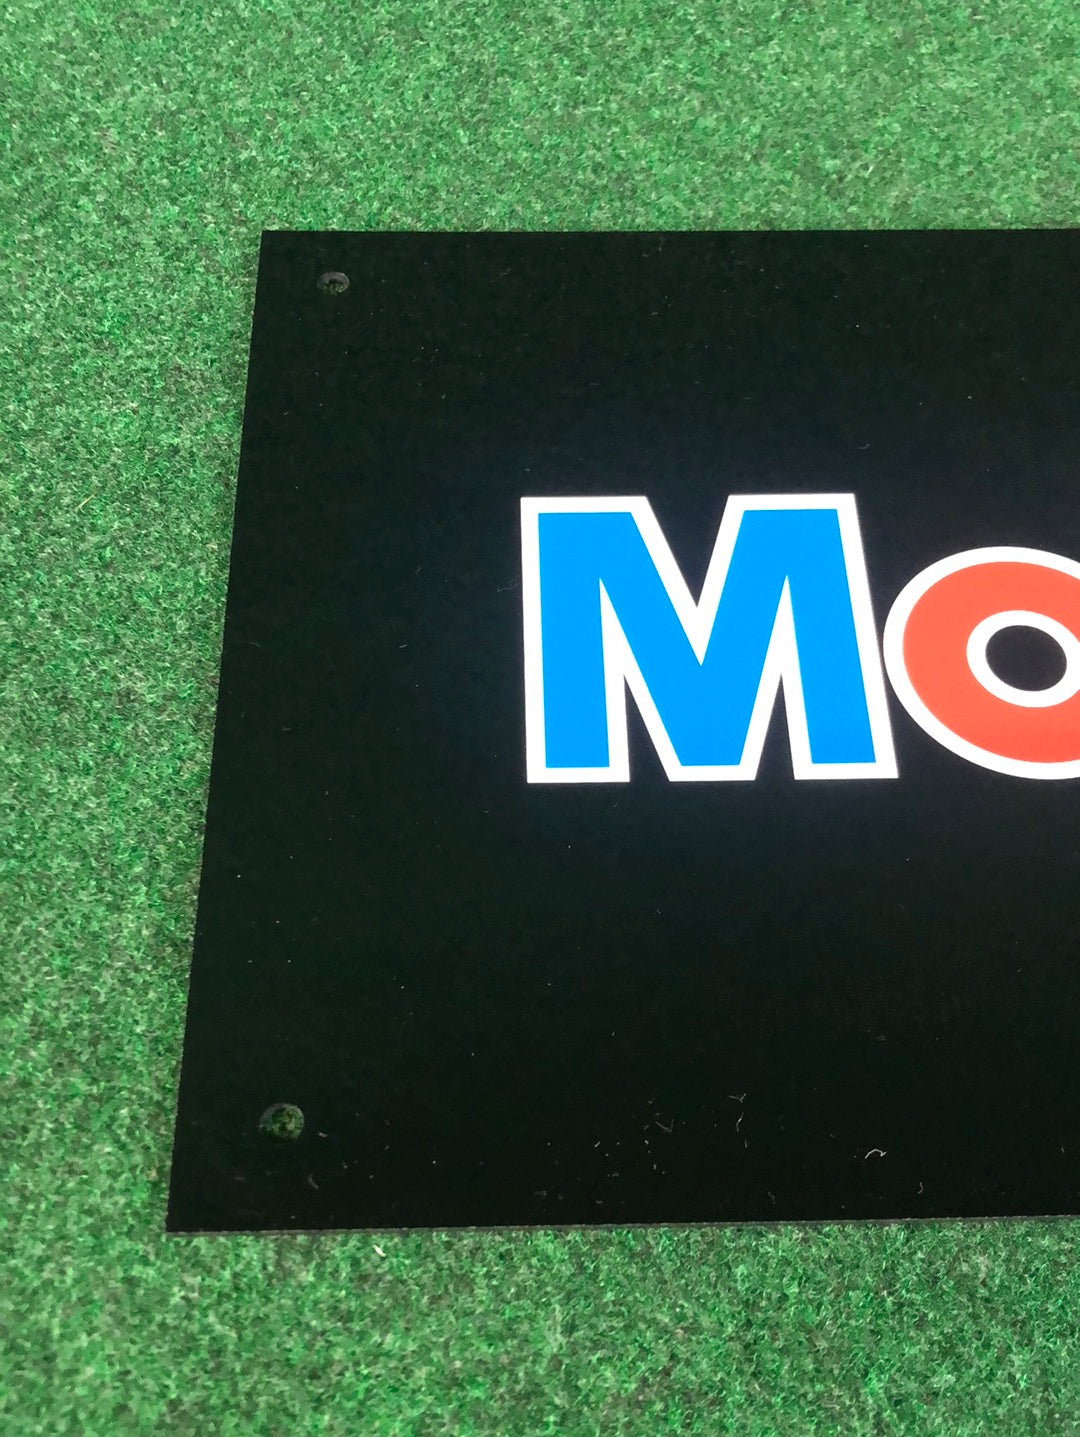 Eneos X Prime Mobil 1 - Dual Sided Retail Display Sign